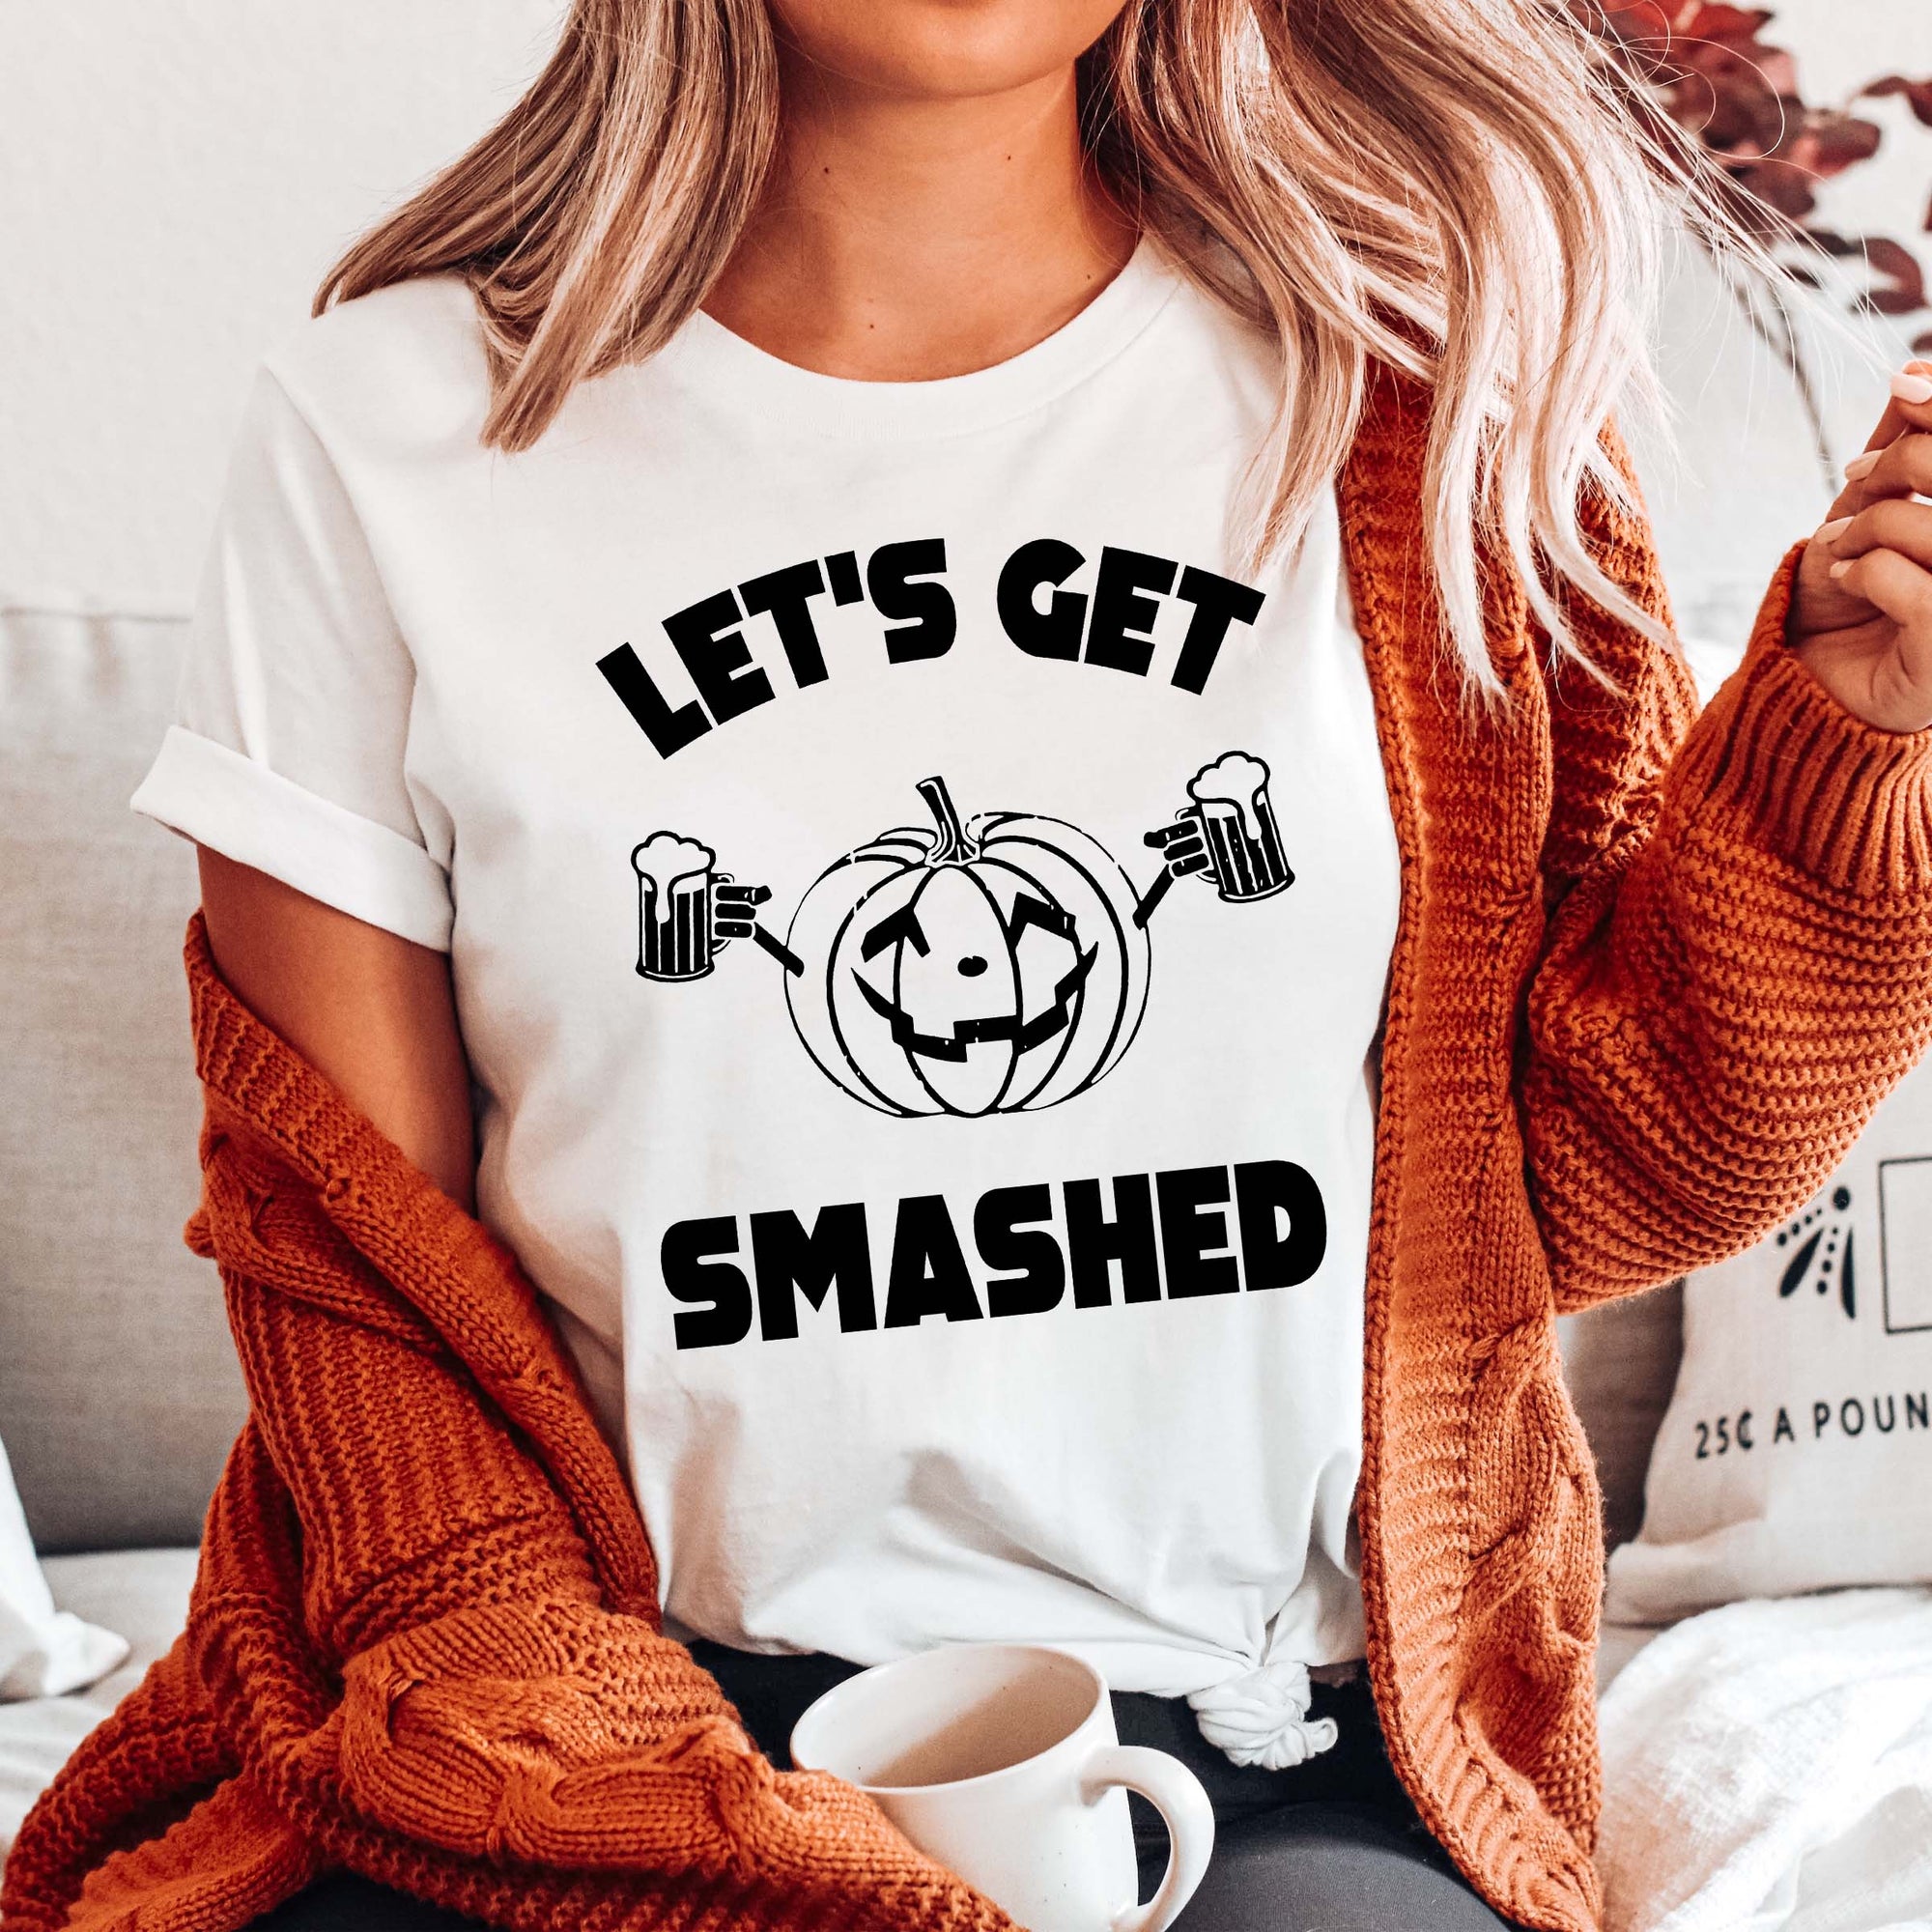 Let's Get Smashed Tee